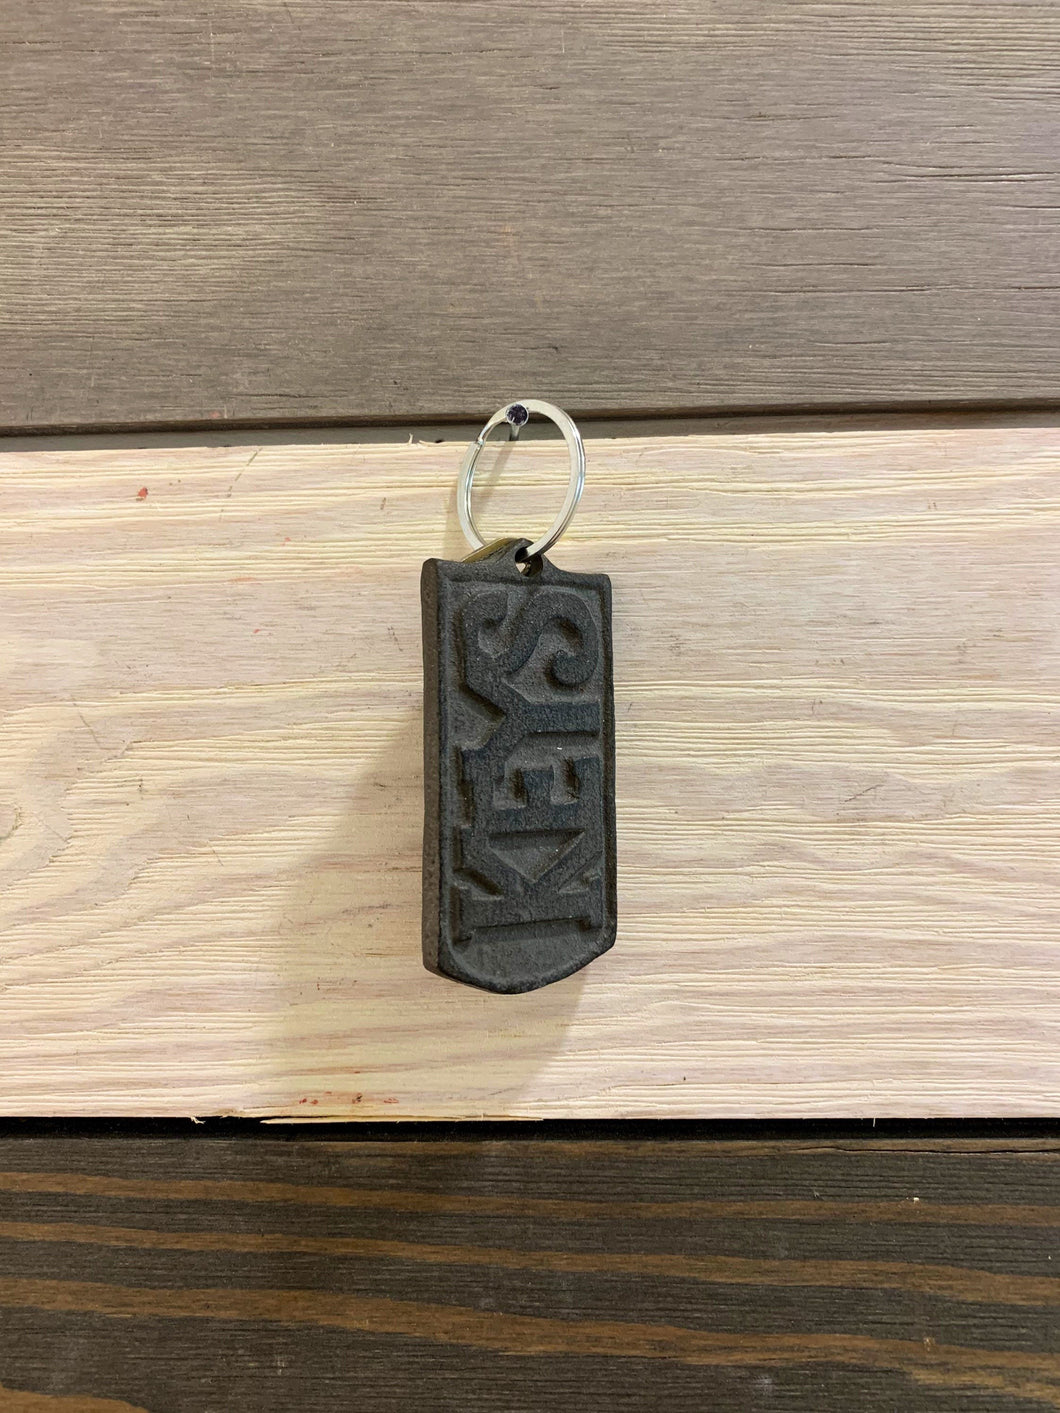 Cast Iron Keychain, great for any old Truck you have, great addition to your keychain, Change the look of your Keys